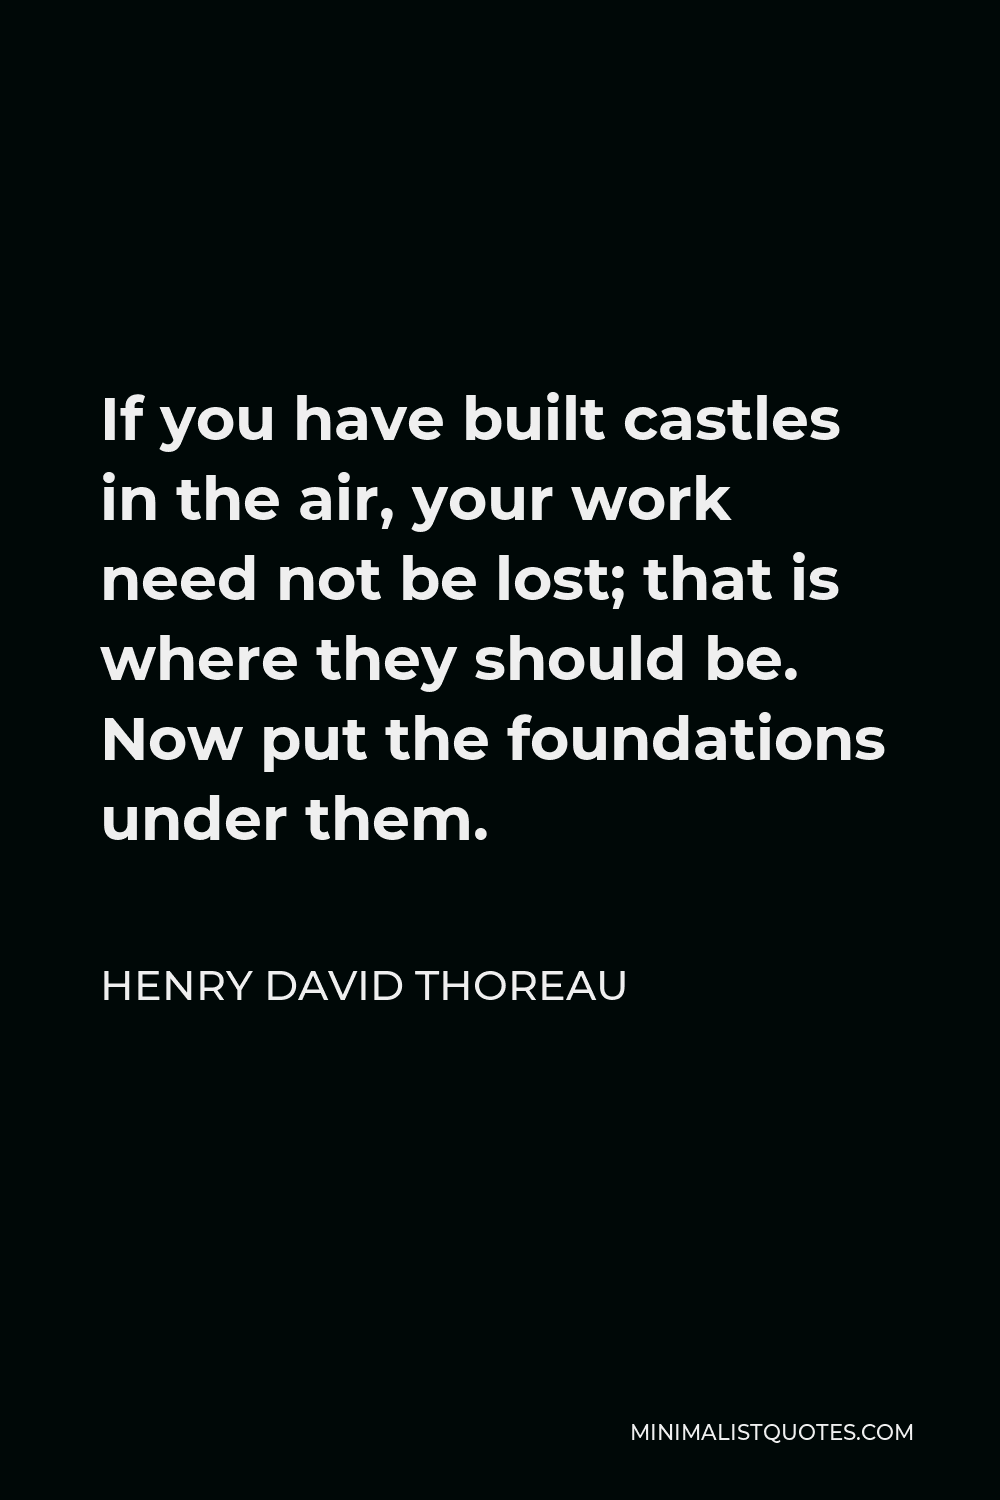 Henry David Thoreau Quote - If you have built castles in the air, your work need not be lost; that is where they should be. Now put the foundations under them.